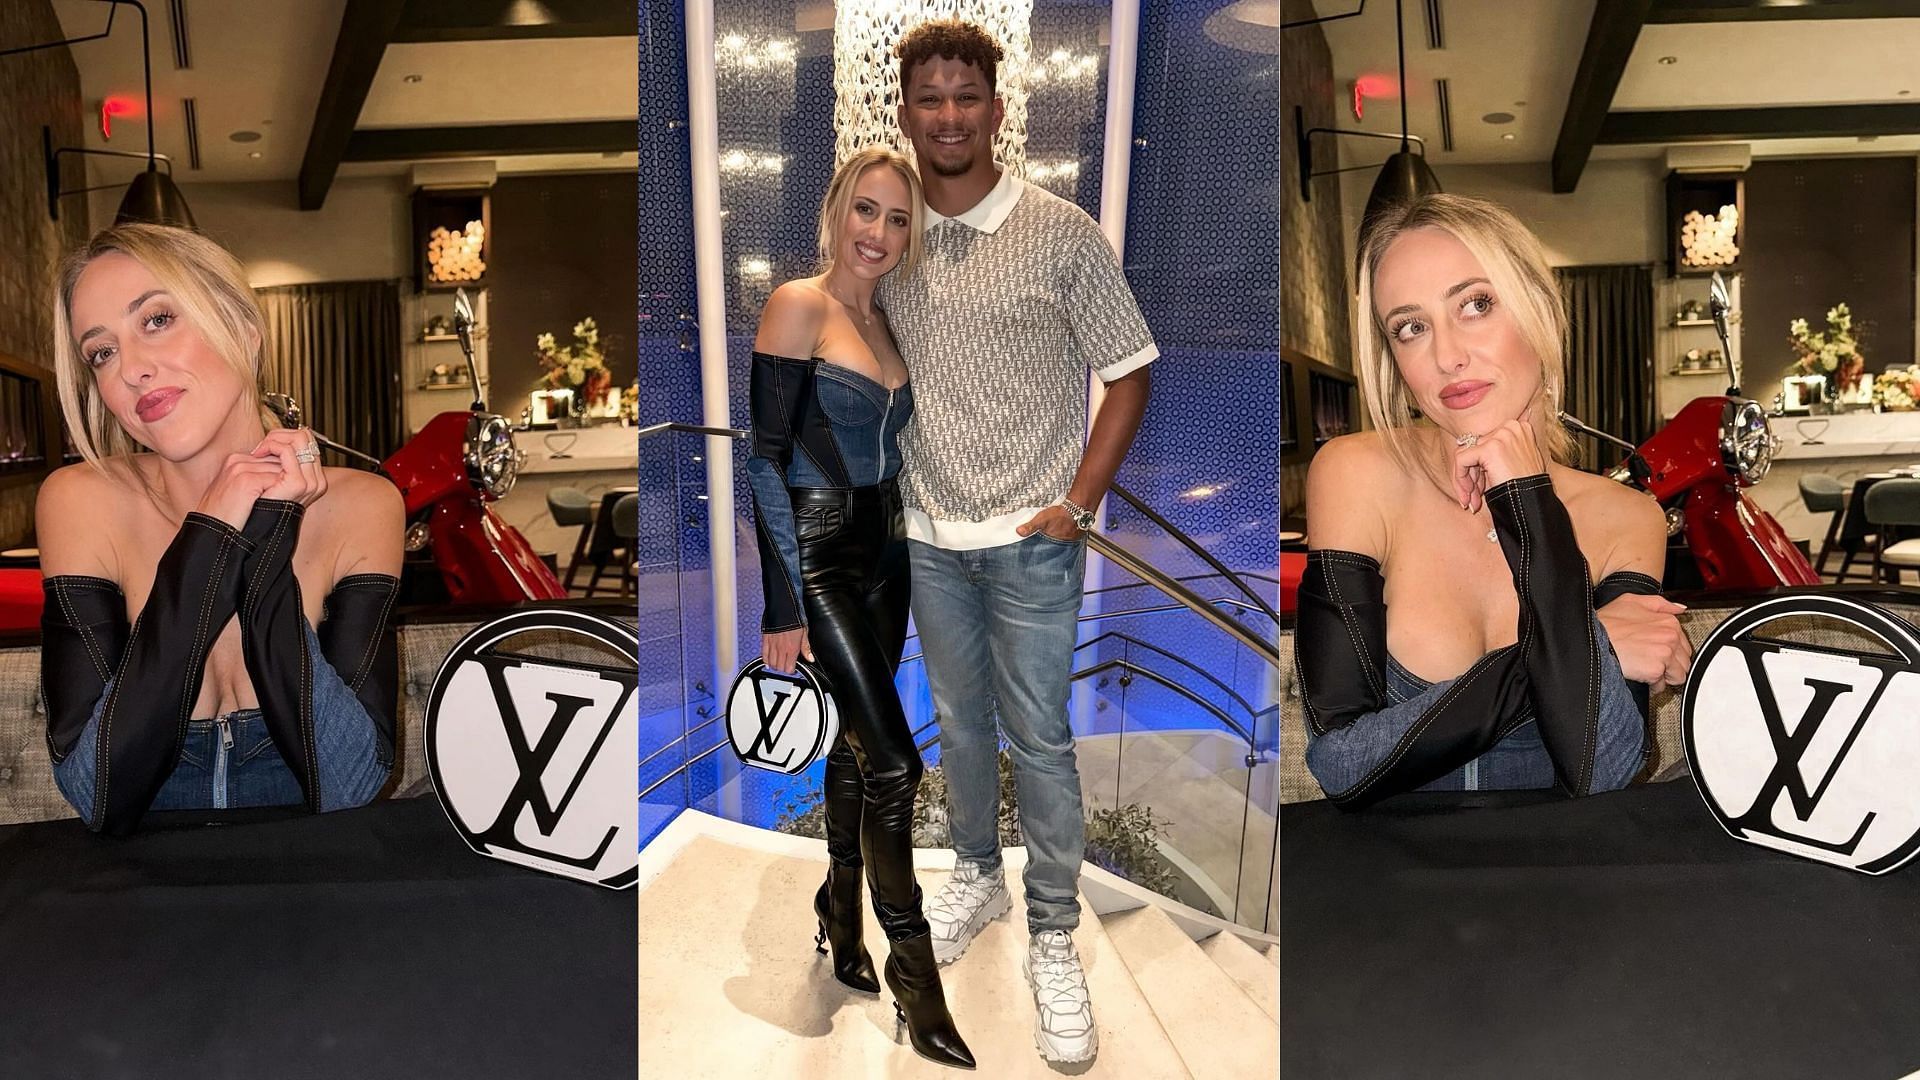 Brittany and Patrick Mahomes head out for date night during NFL offseason (Image credit: @brittanylynne)